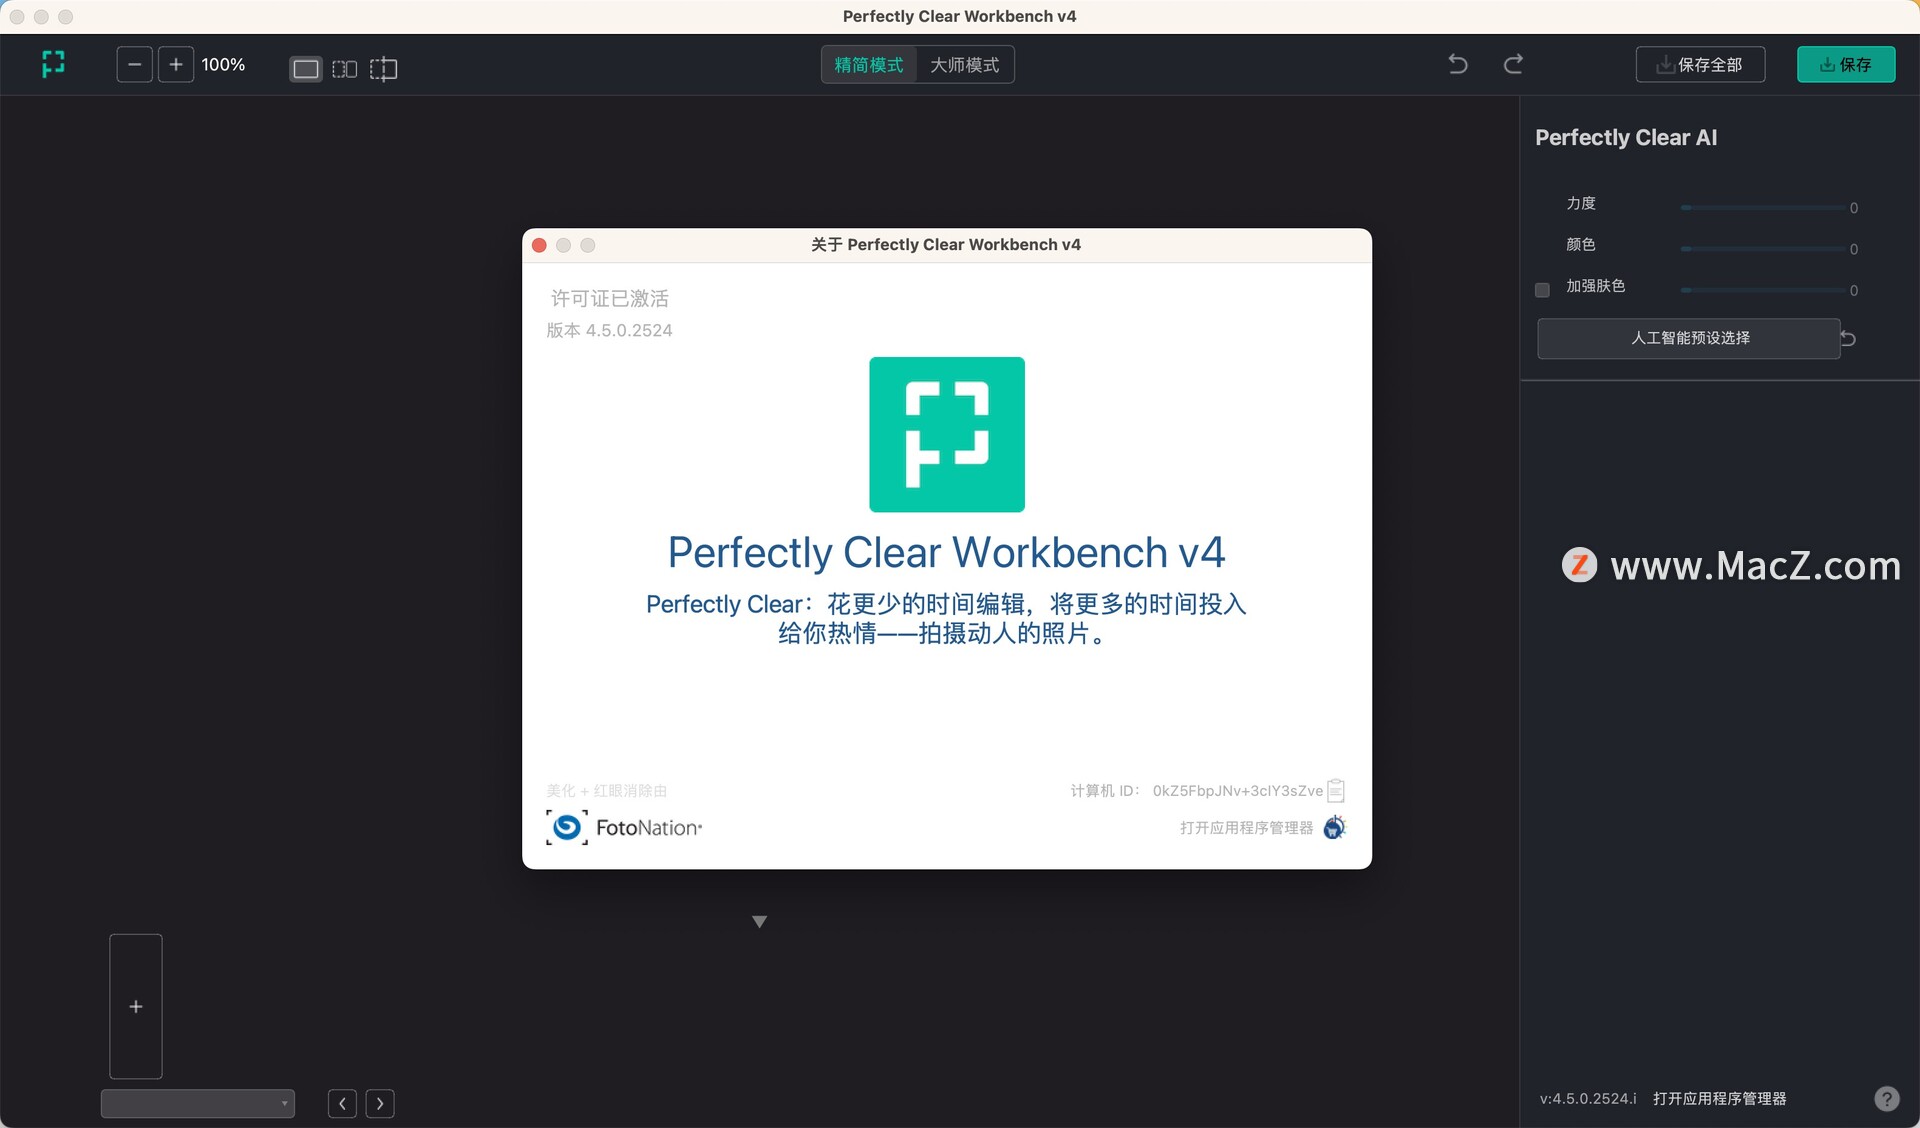 Perfectly Clear WorkBench 4.6.0.2570 instal the new for mac